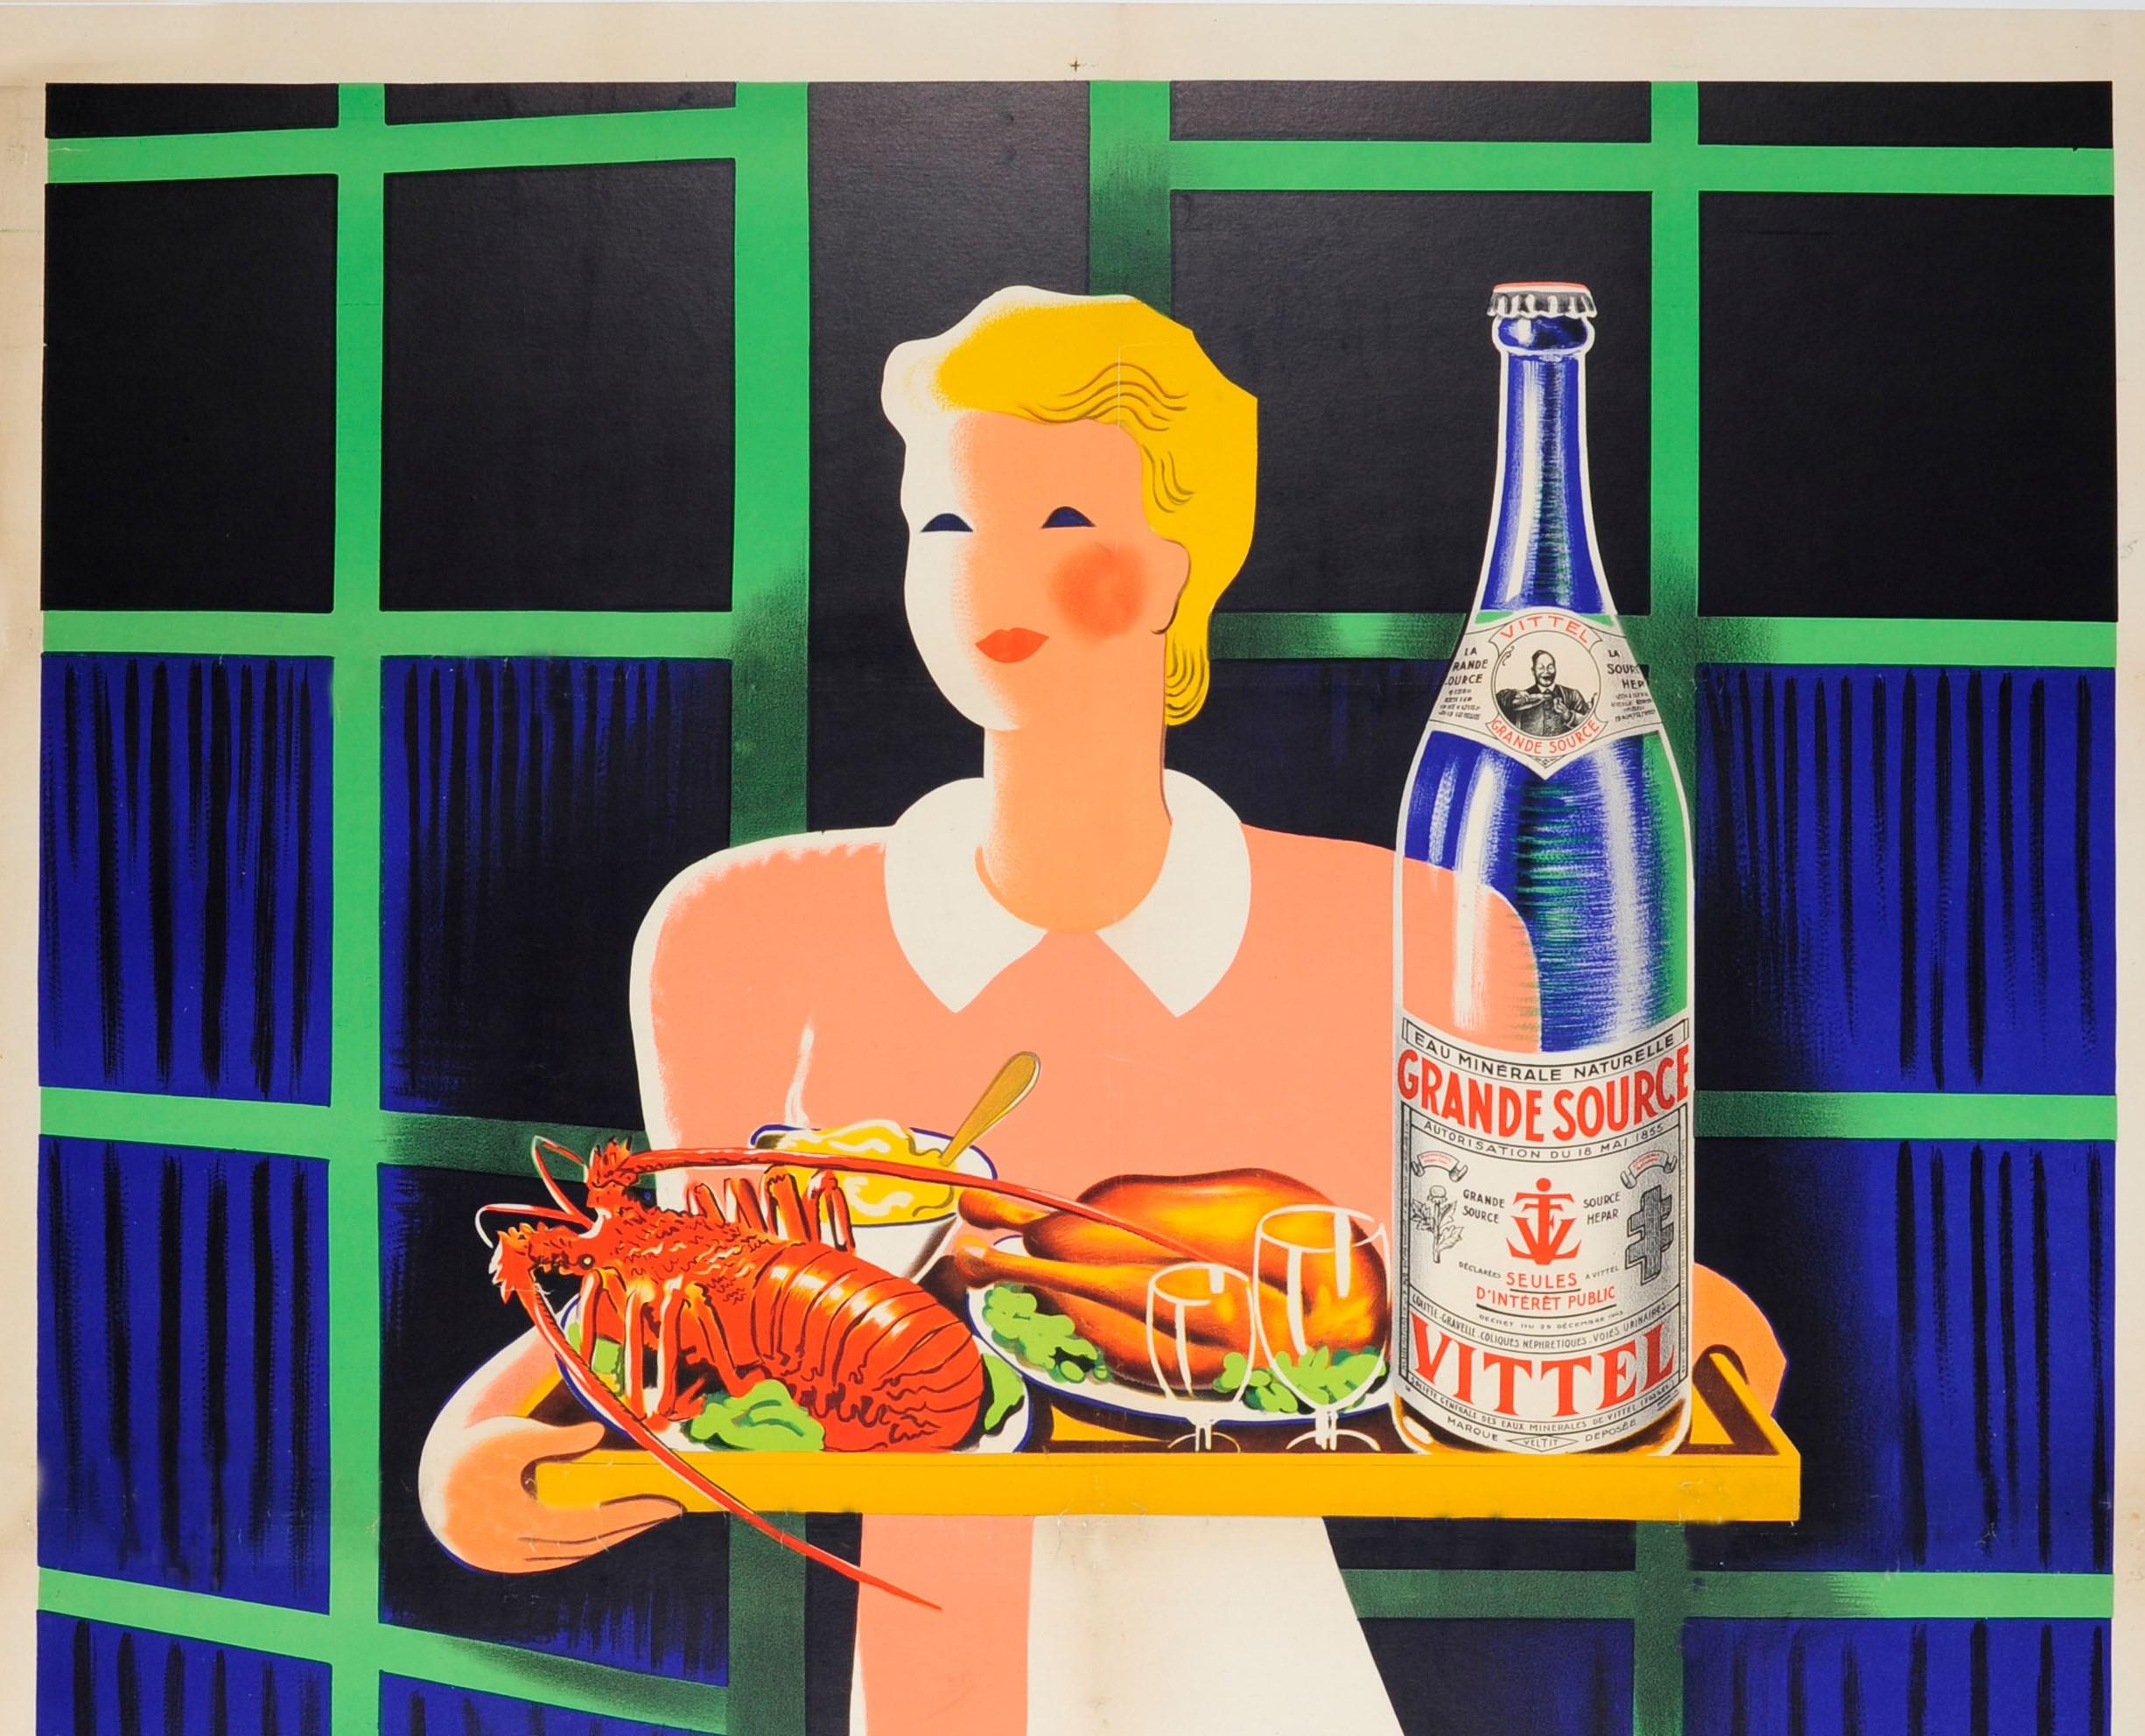 Original vintage drink advertising poster for Grande Source Vittel featuring a great illustration of a lady in an apron holding a tray of food including a lobster and chicken with a bottle of Vittel water and two glasses in front of a green and blue